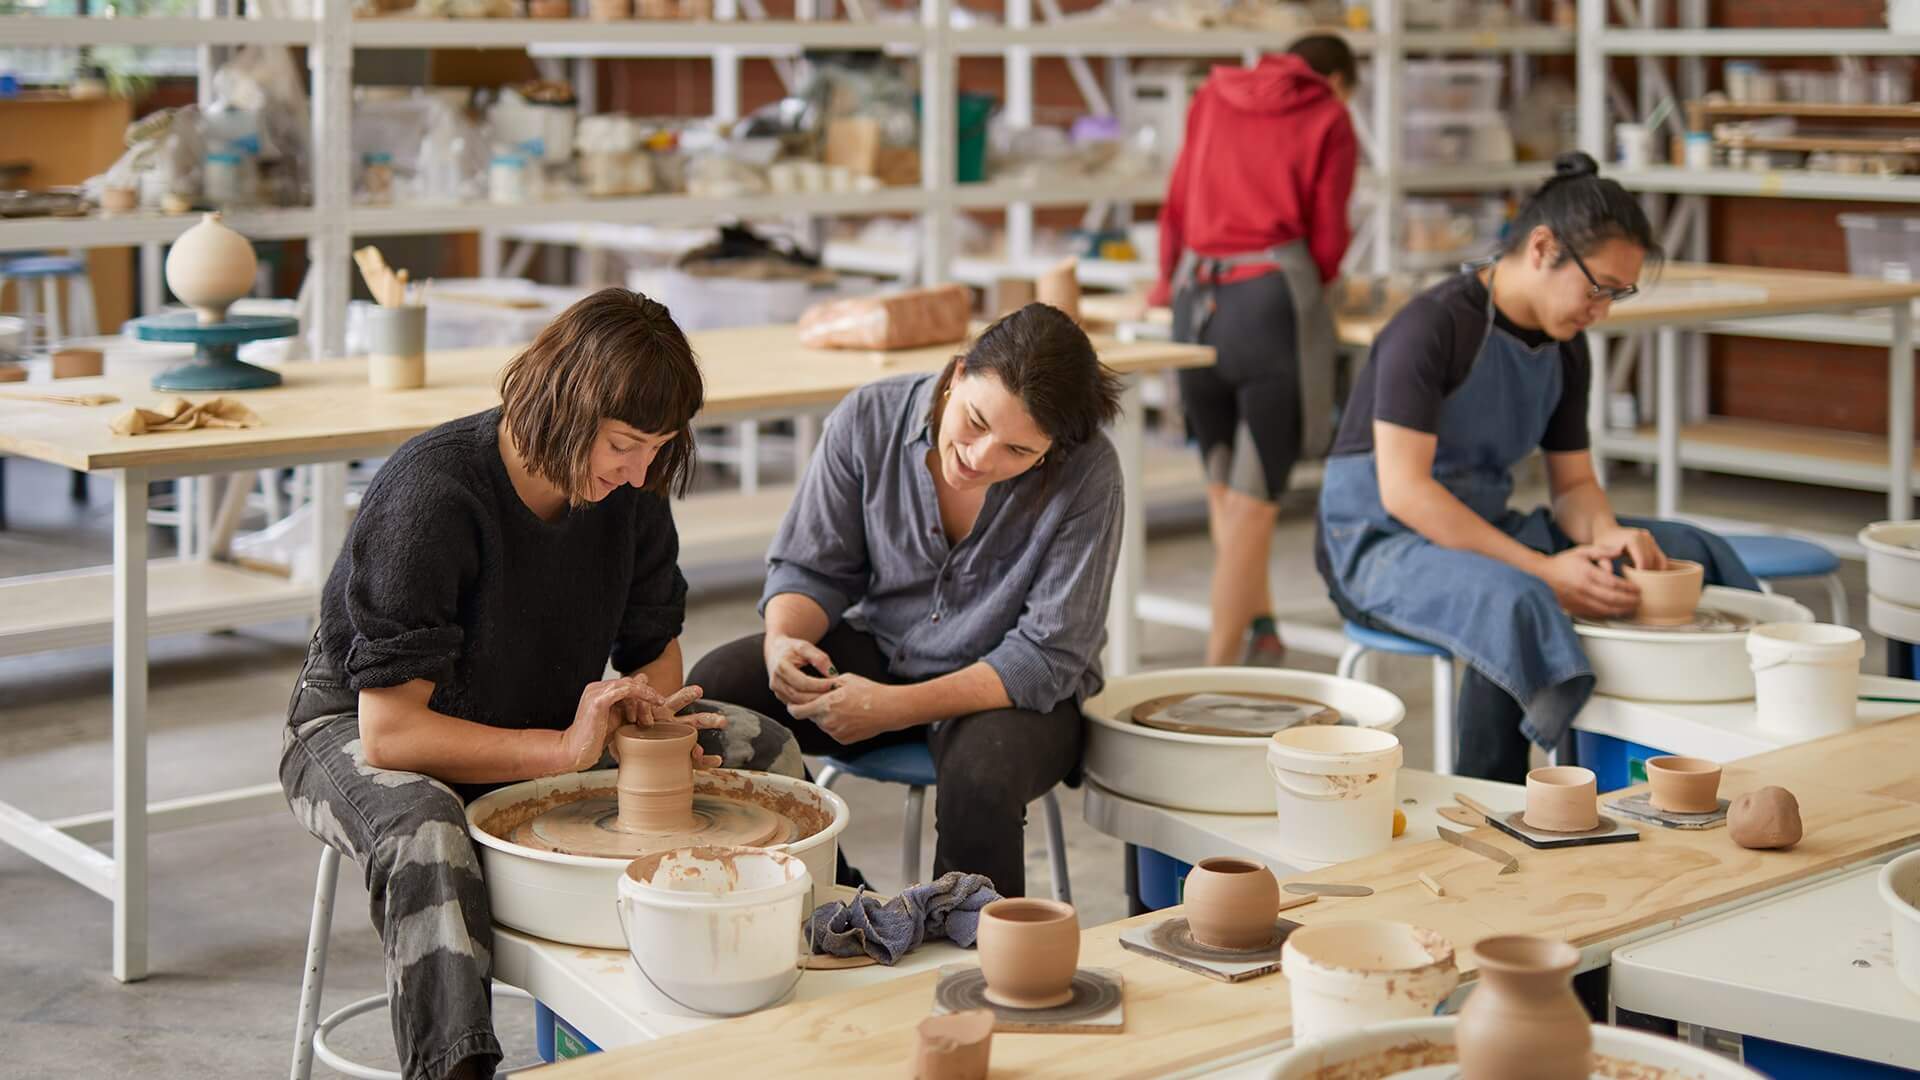 Twelve80 ceramics studio - home to some of the best pottery classes in Melbourne